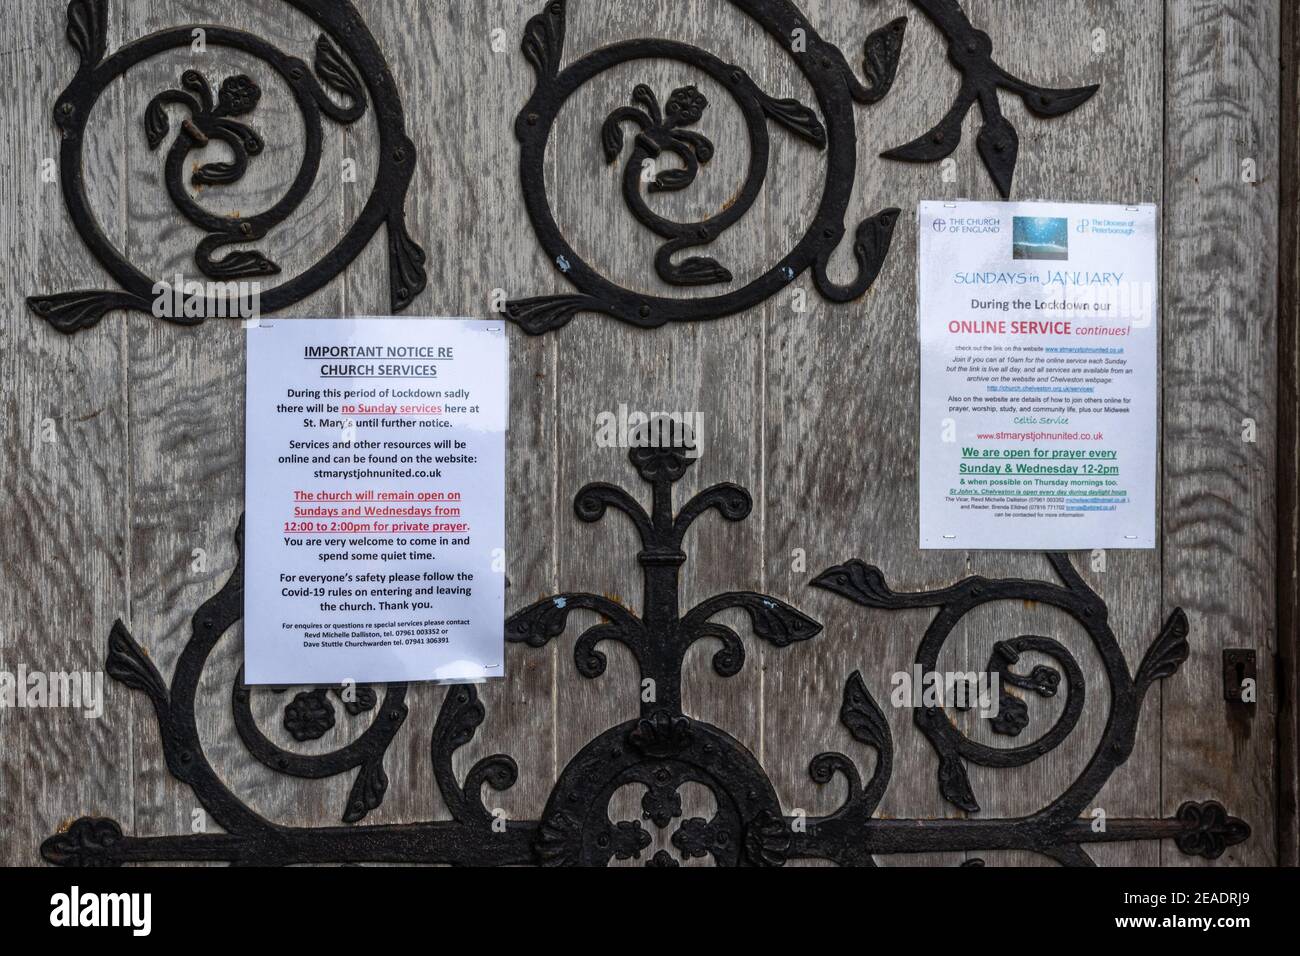 Covid 19 related notices posted on an ornate church door during the third UK lockdown, St Marys Church, Higham Ferrers, Northamptonshire. Stock Photo